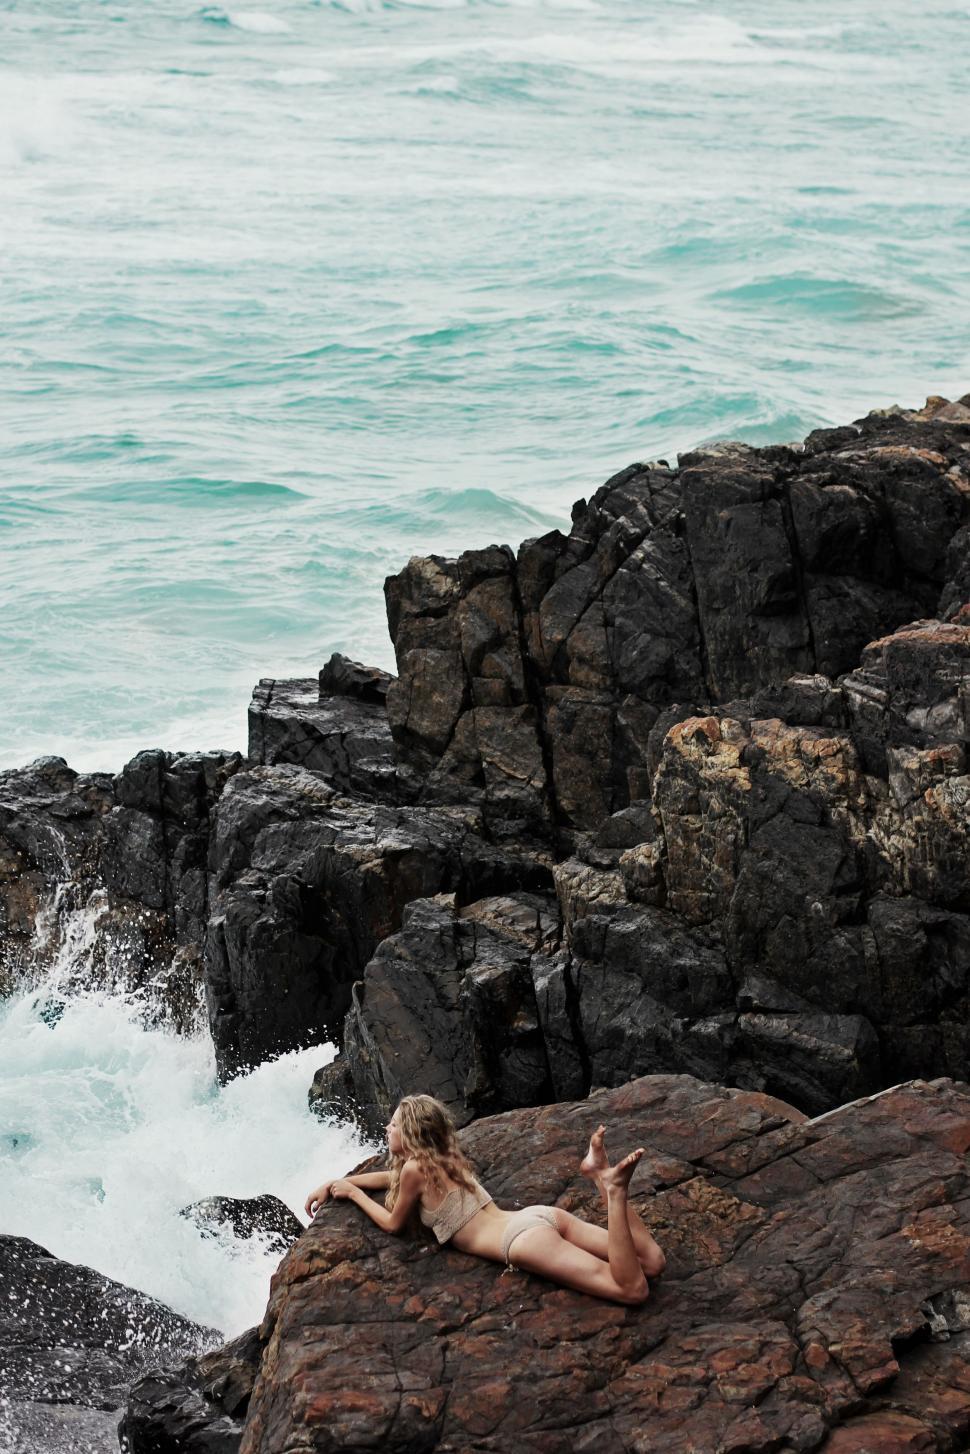 Free Image of Woman Laying on Rock by the Ocean 